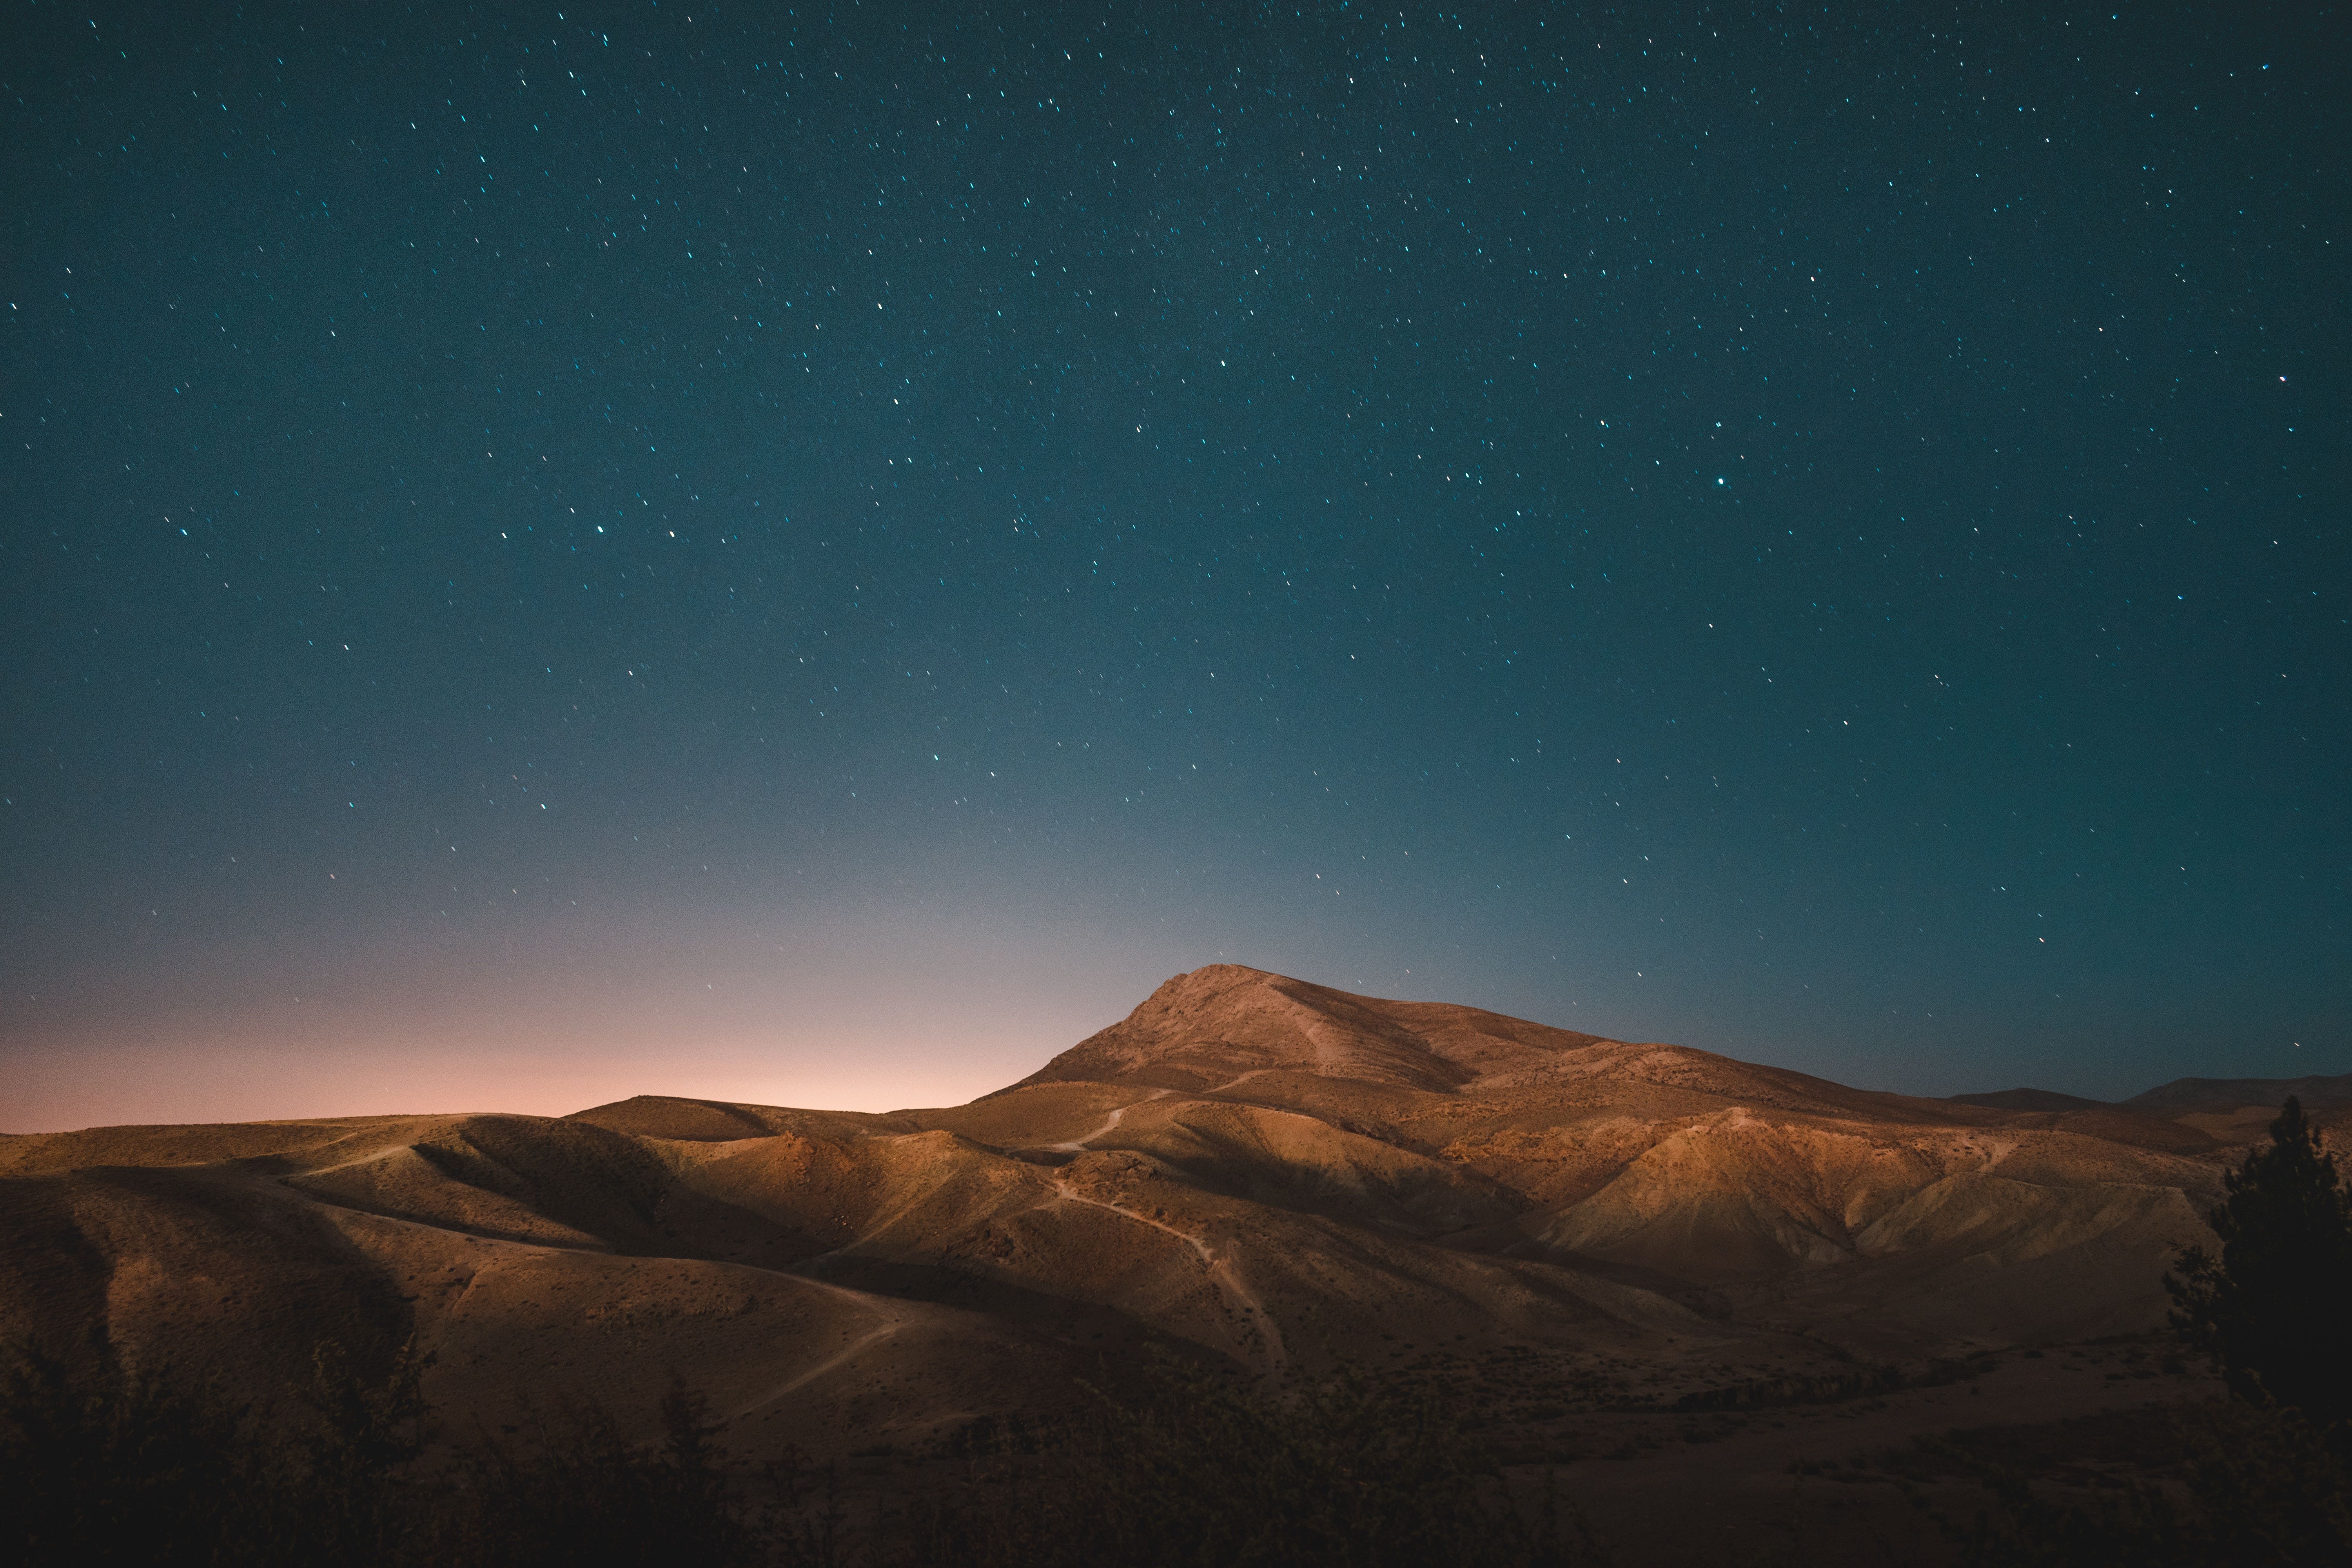 6000x4000 #glow, #mountain, #awesome, #planet, #simple, #long, #sand, #minimal, #stars, #hill, #night, #Free picture, #sky, #nature, #midnight, #blue, #earth, #landscape, #nightsky, #wallpaper, #star. Mocah.org HD Desktop Wallpaper